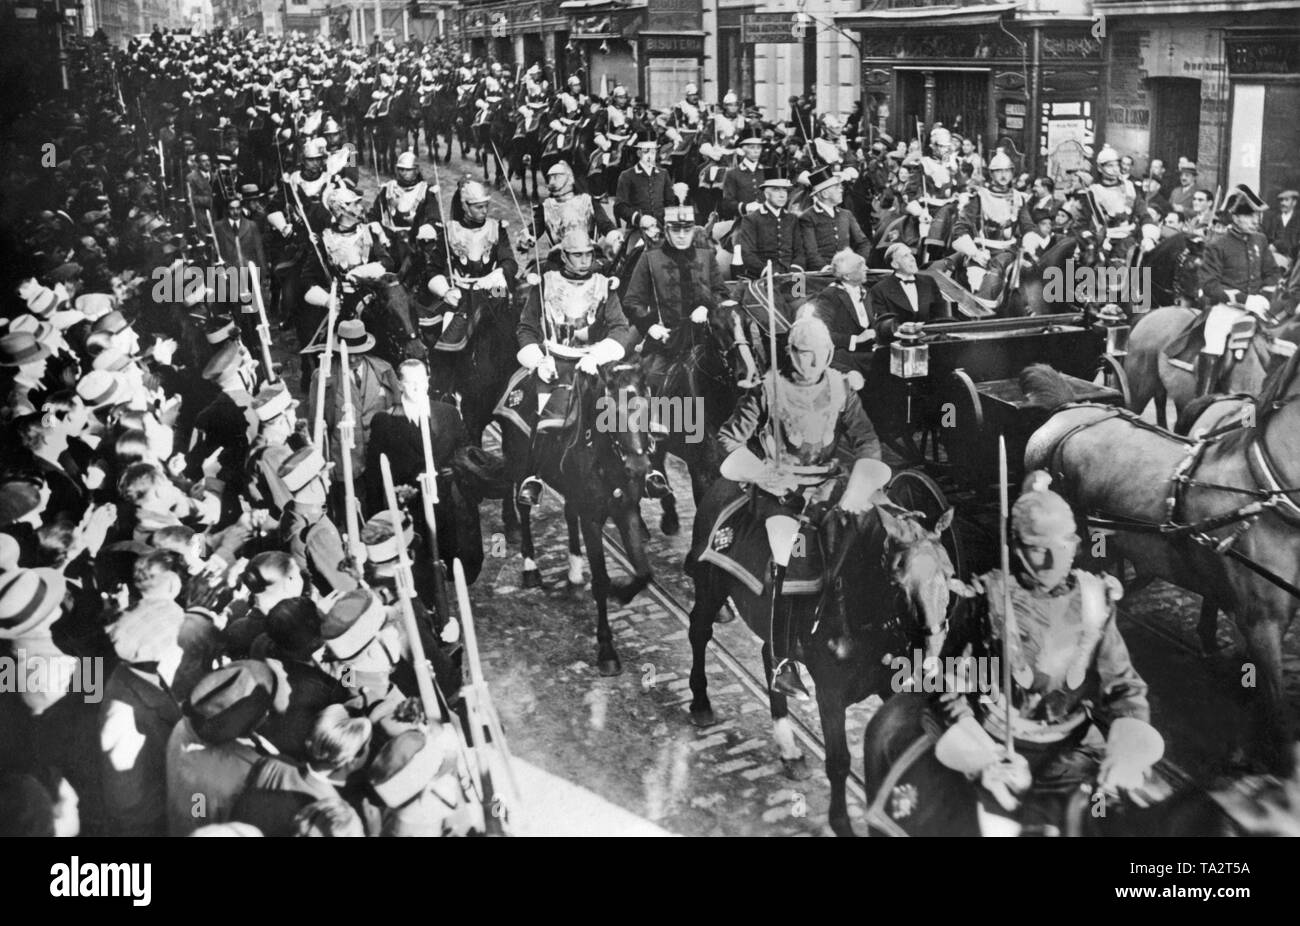 The new president of Spain drives through the city - left in the car Niceto Alcala Zamora. Stock Photo